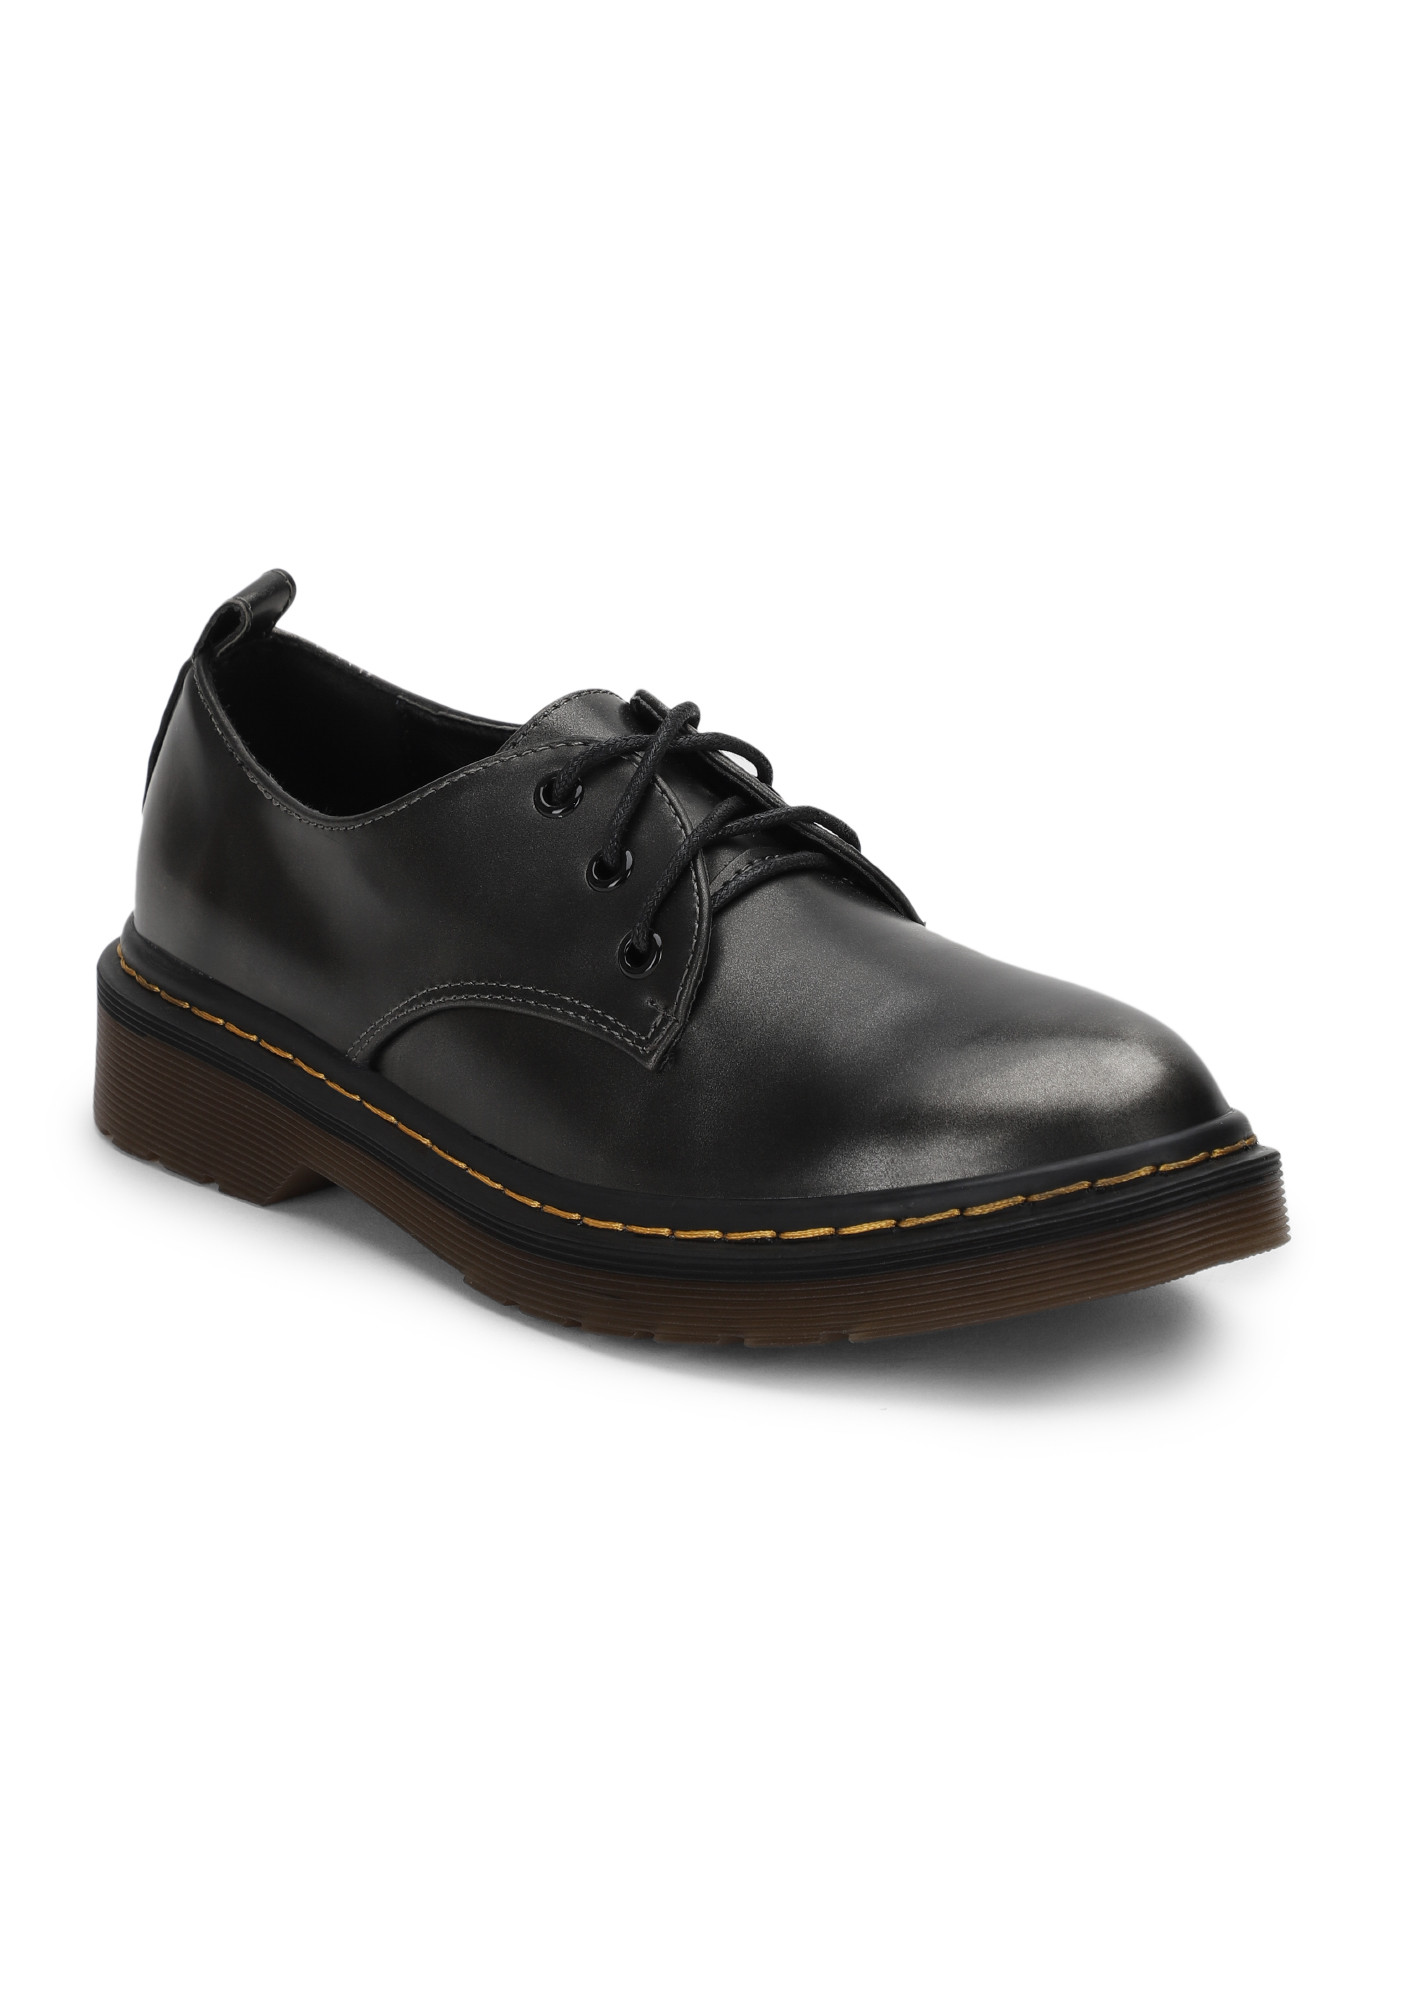 PLAYING THE FAIR GAME BLACK DERBY SHOES